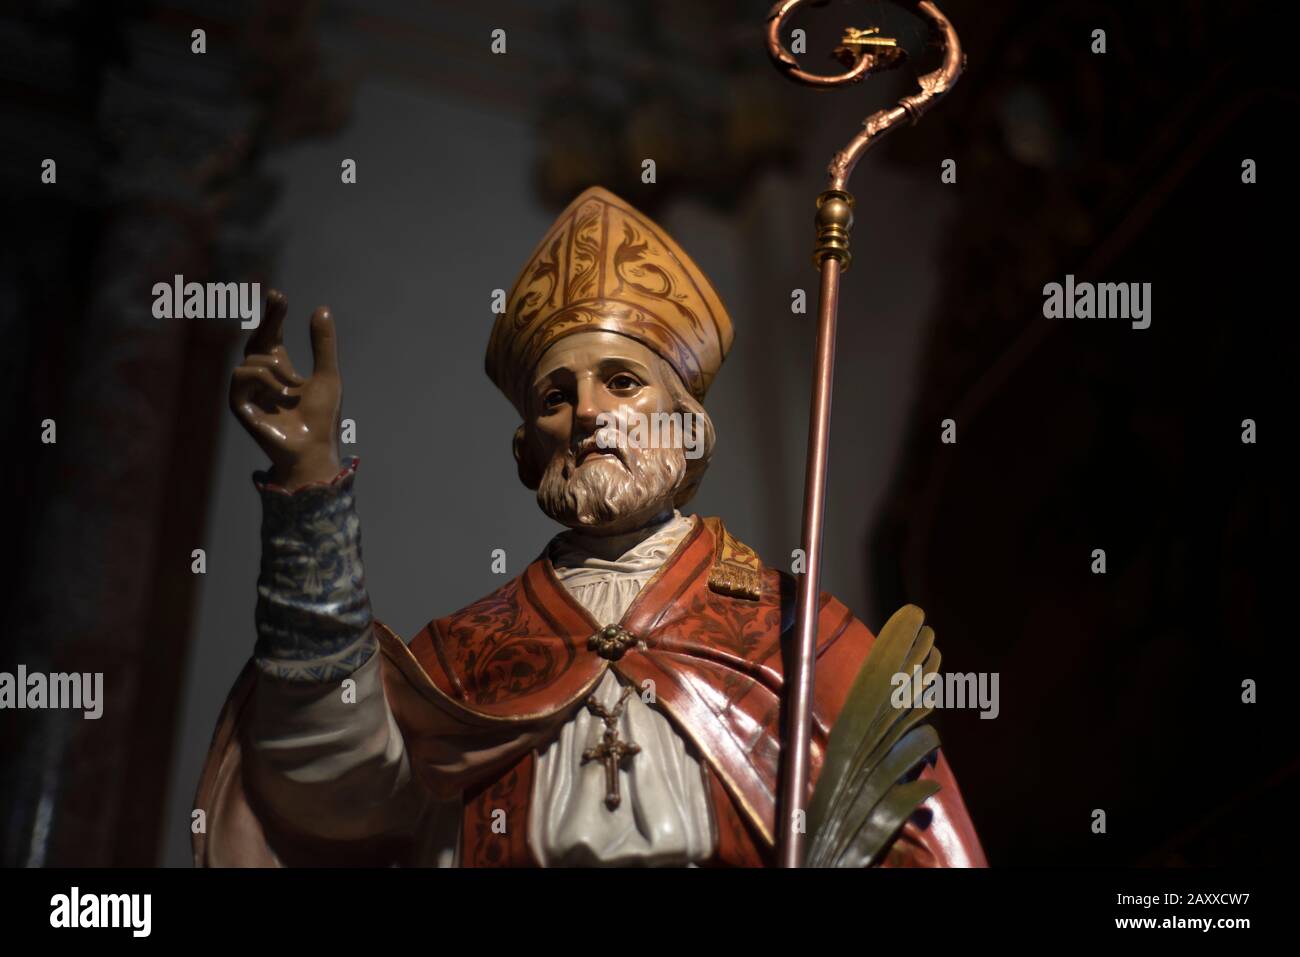 Valentine's day image. Statue of the saint in the basilica of the Italian city of Terni. Stock Photo